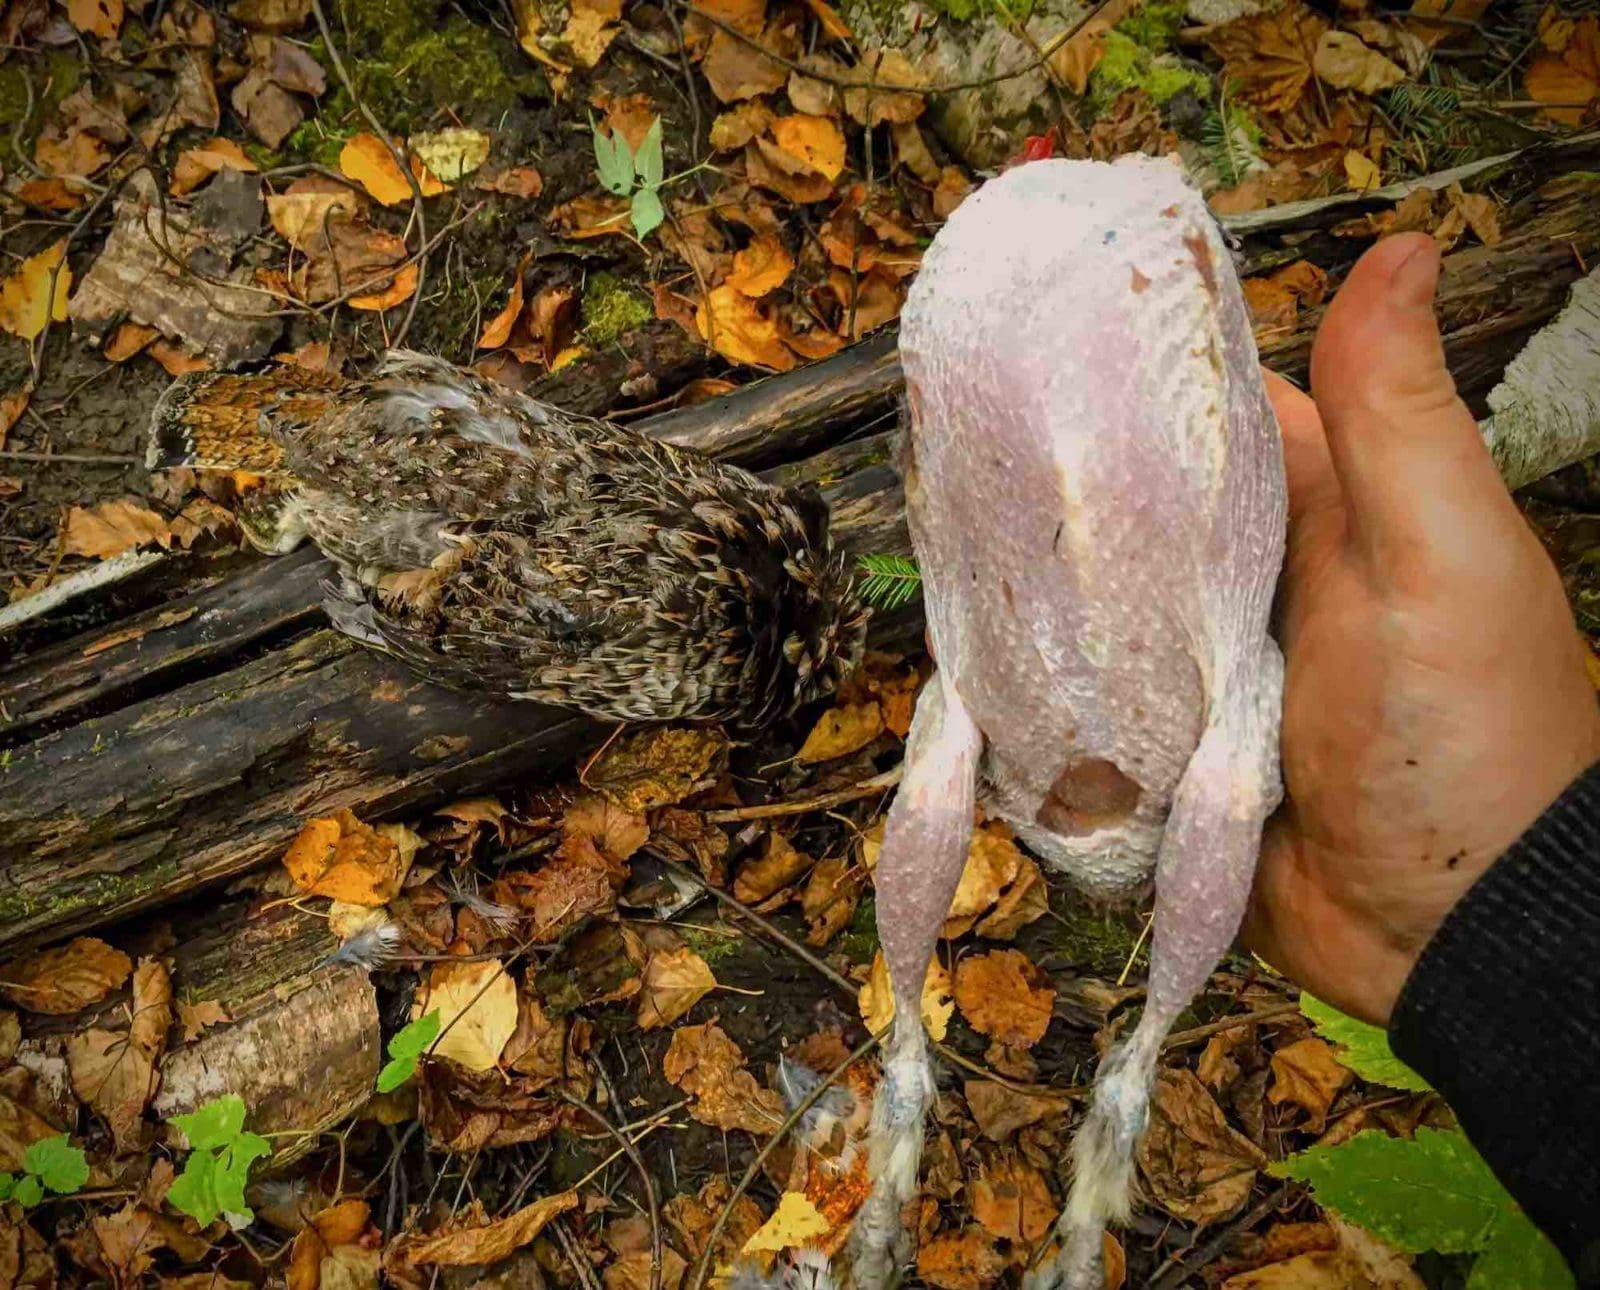 A plucked ruffed grouse with a freshly shot grouse in the background on autumn leaves